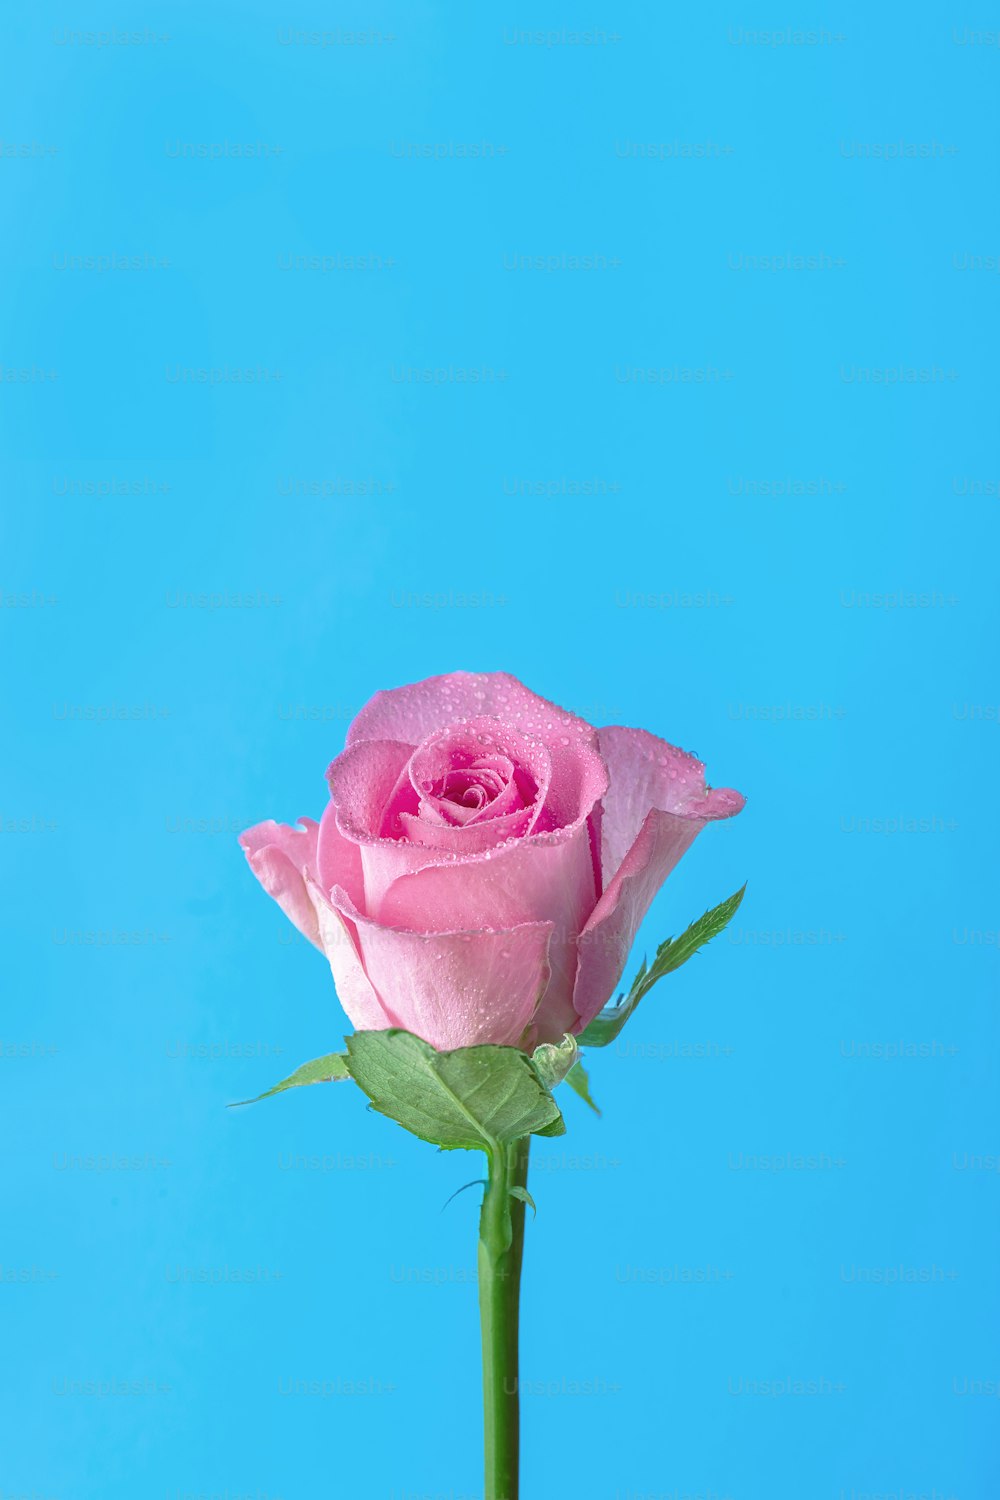 a single pink rose sitting in a vase